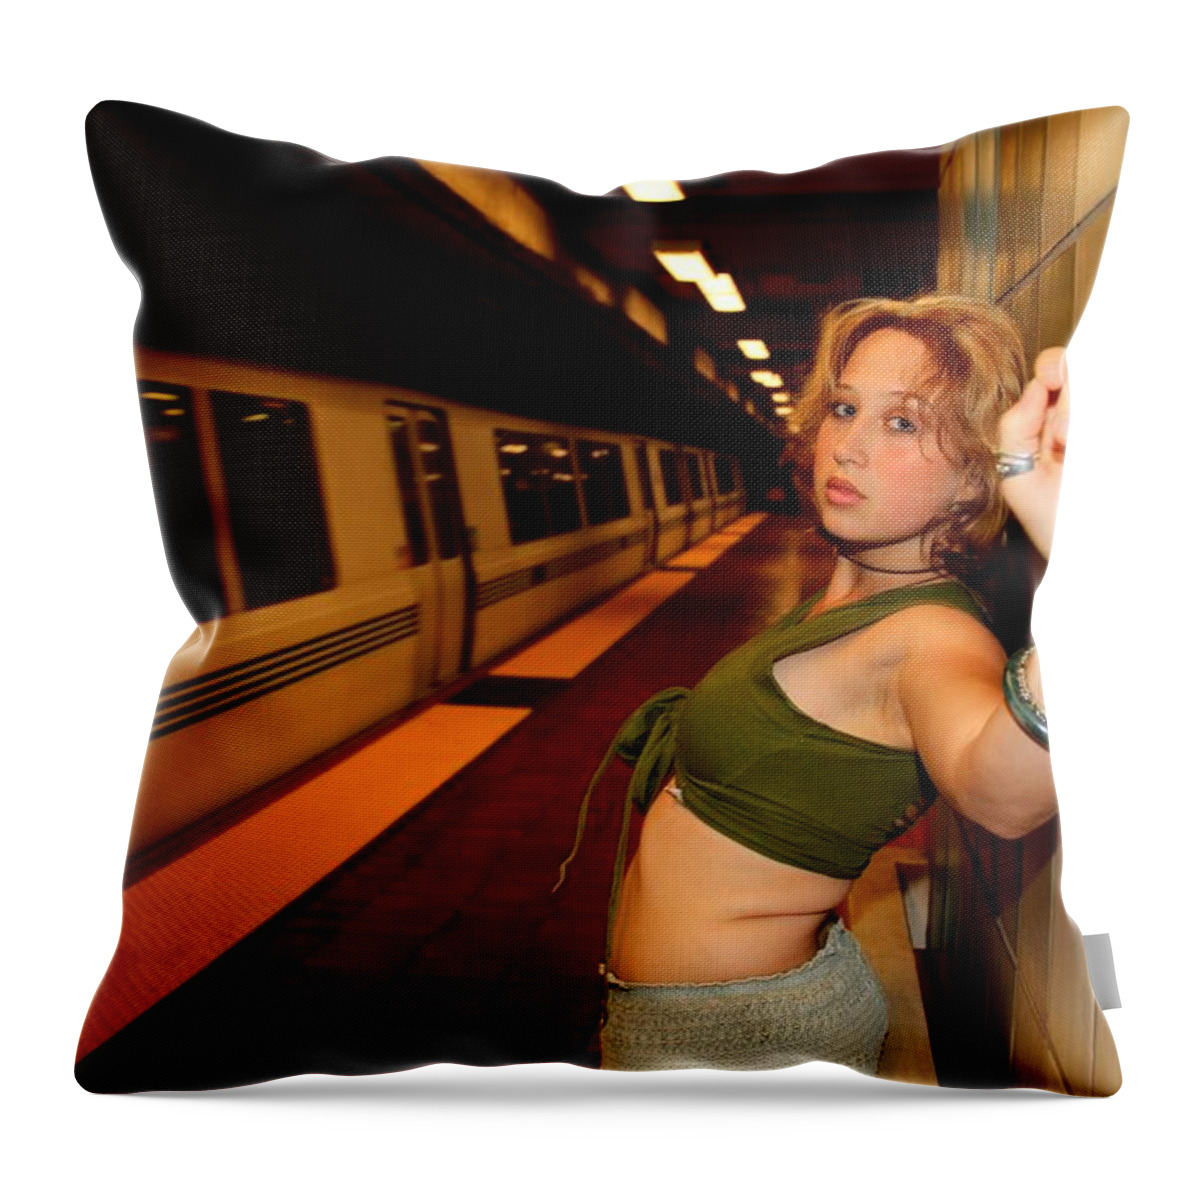 Female Throw Pillow featuring the photograph Labyrinth by Nick David